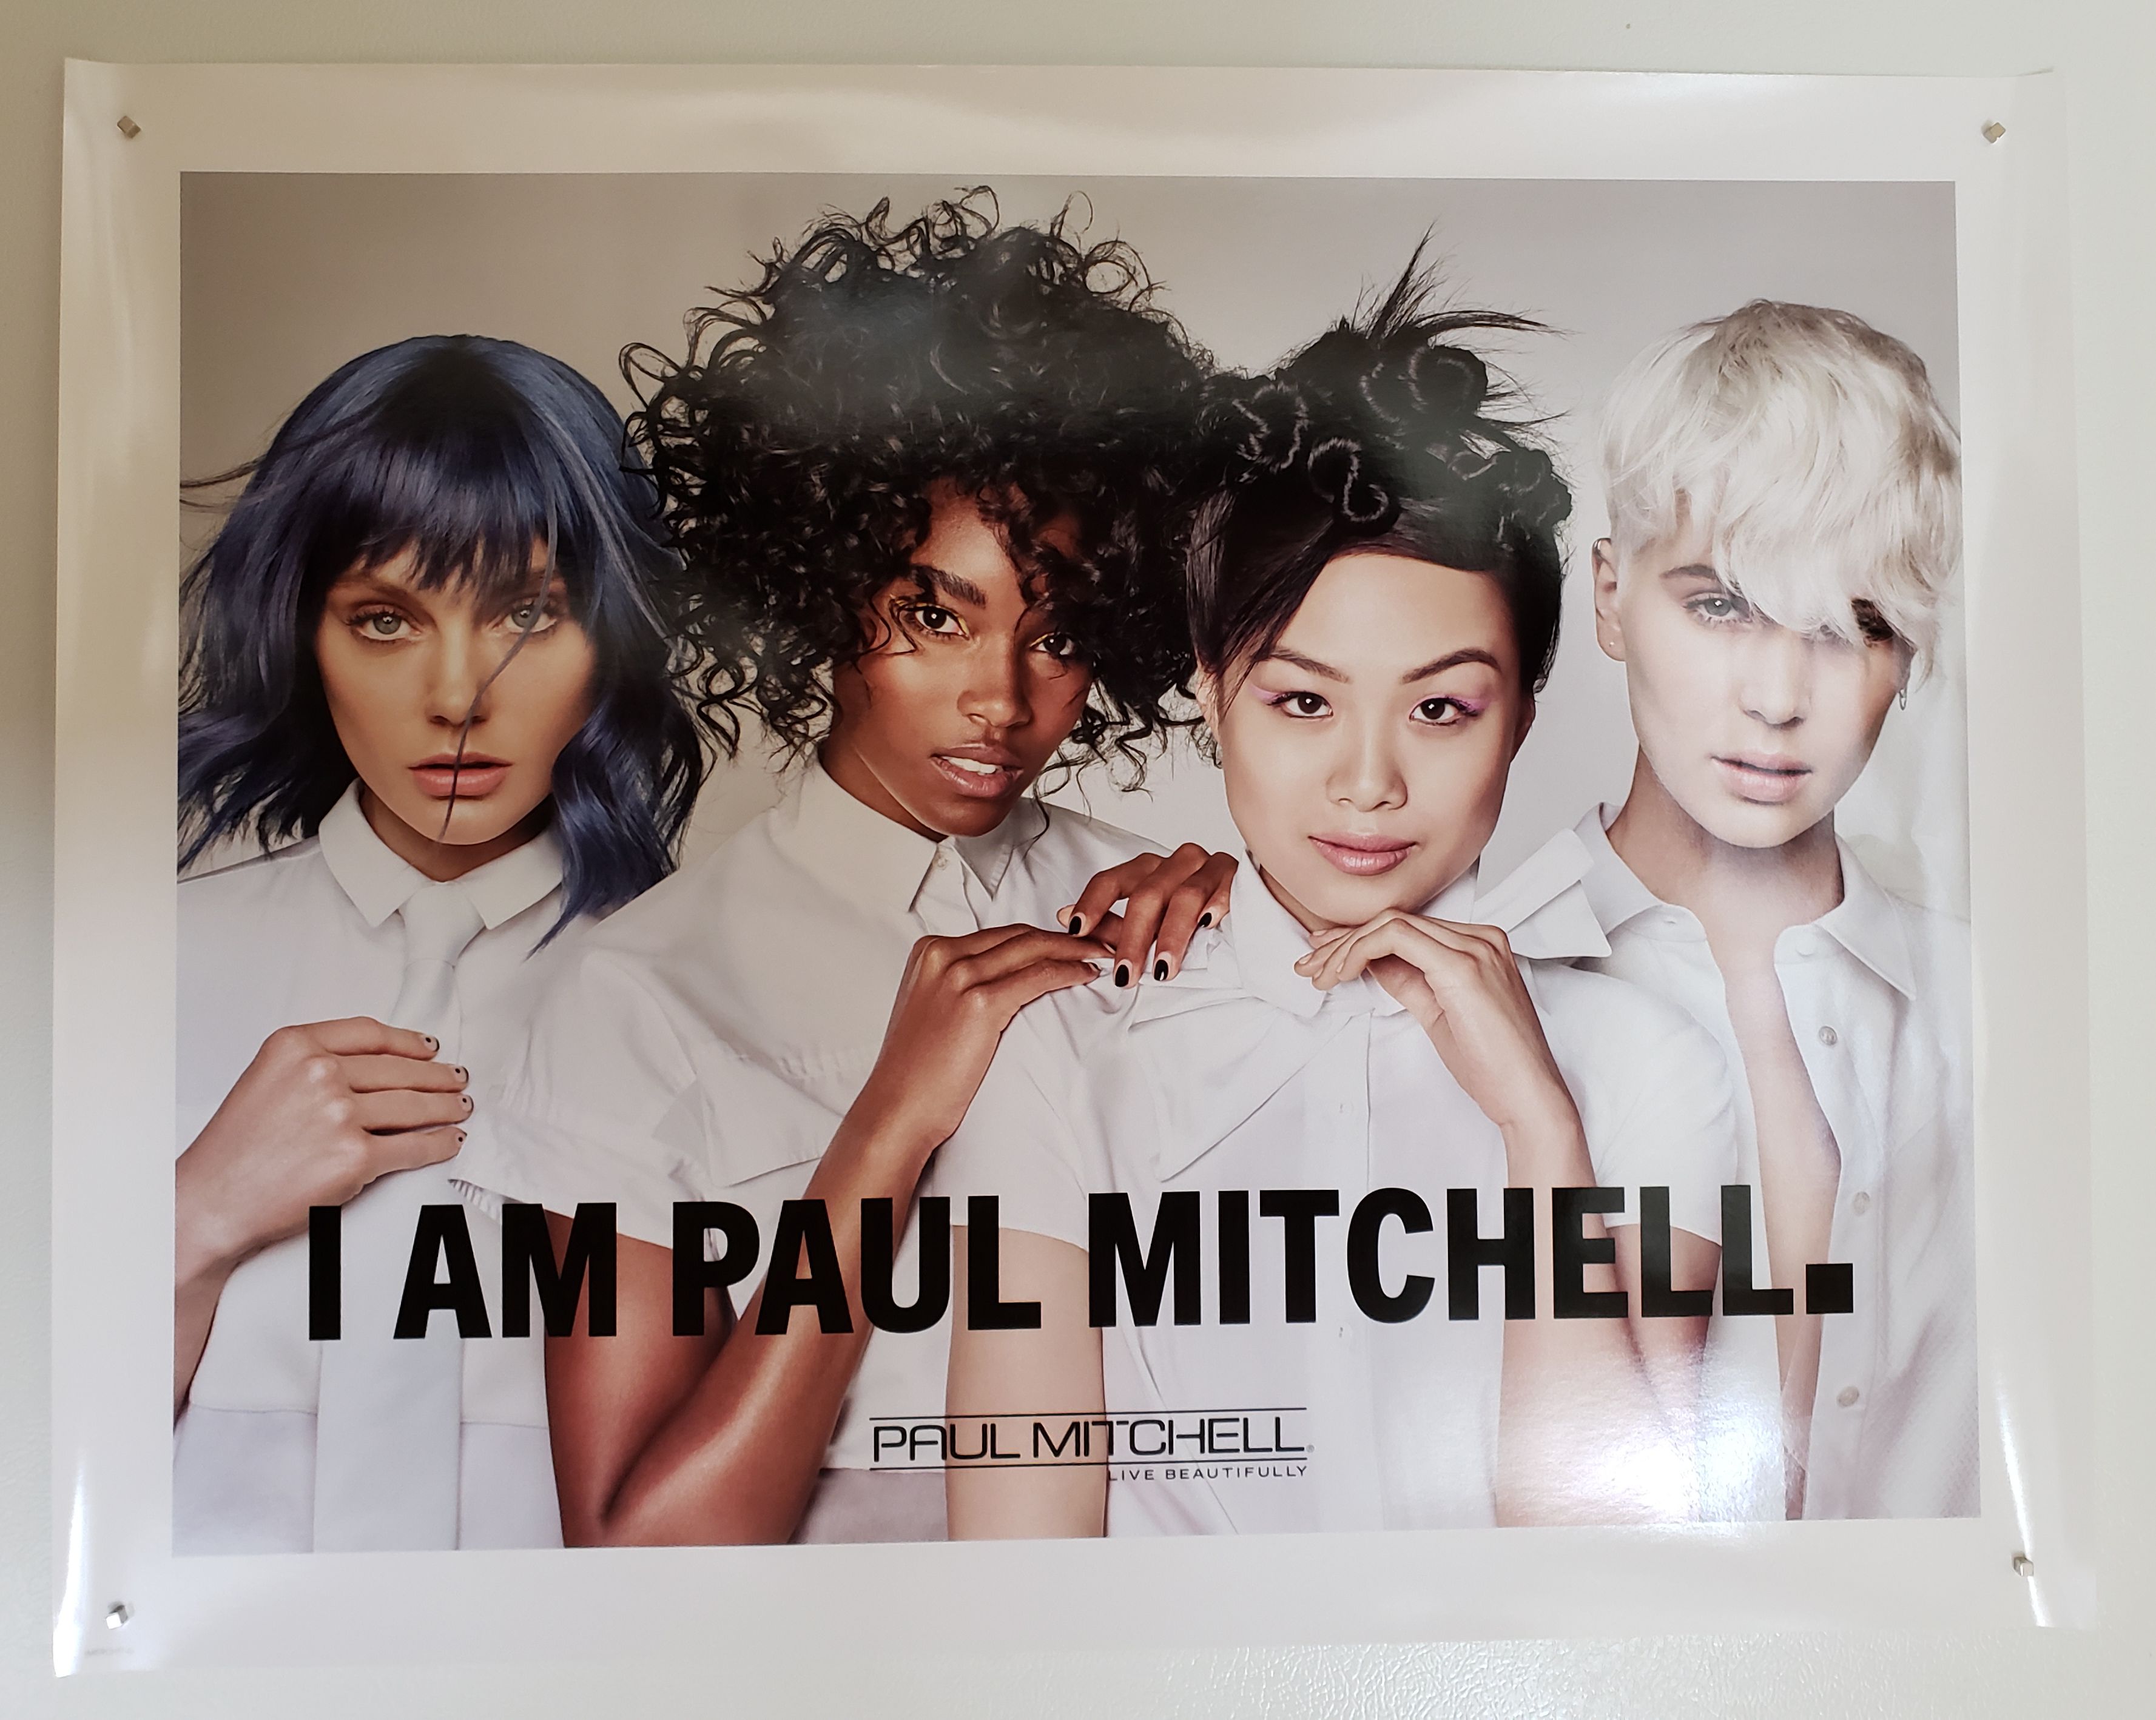 Paul Mitchell Hair Salon Posters - Set of 5 for Sale in Montgomery Village,  MD - OfferUp